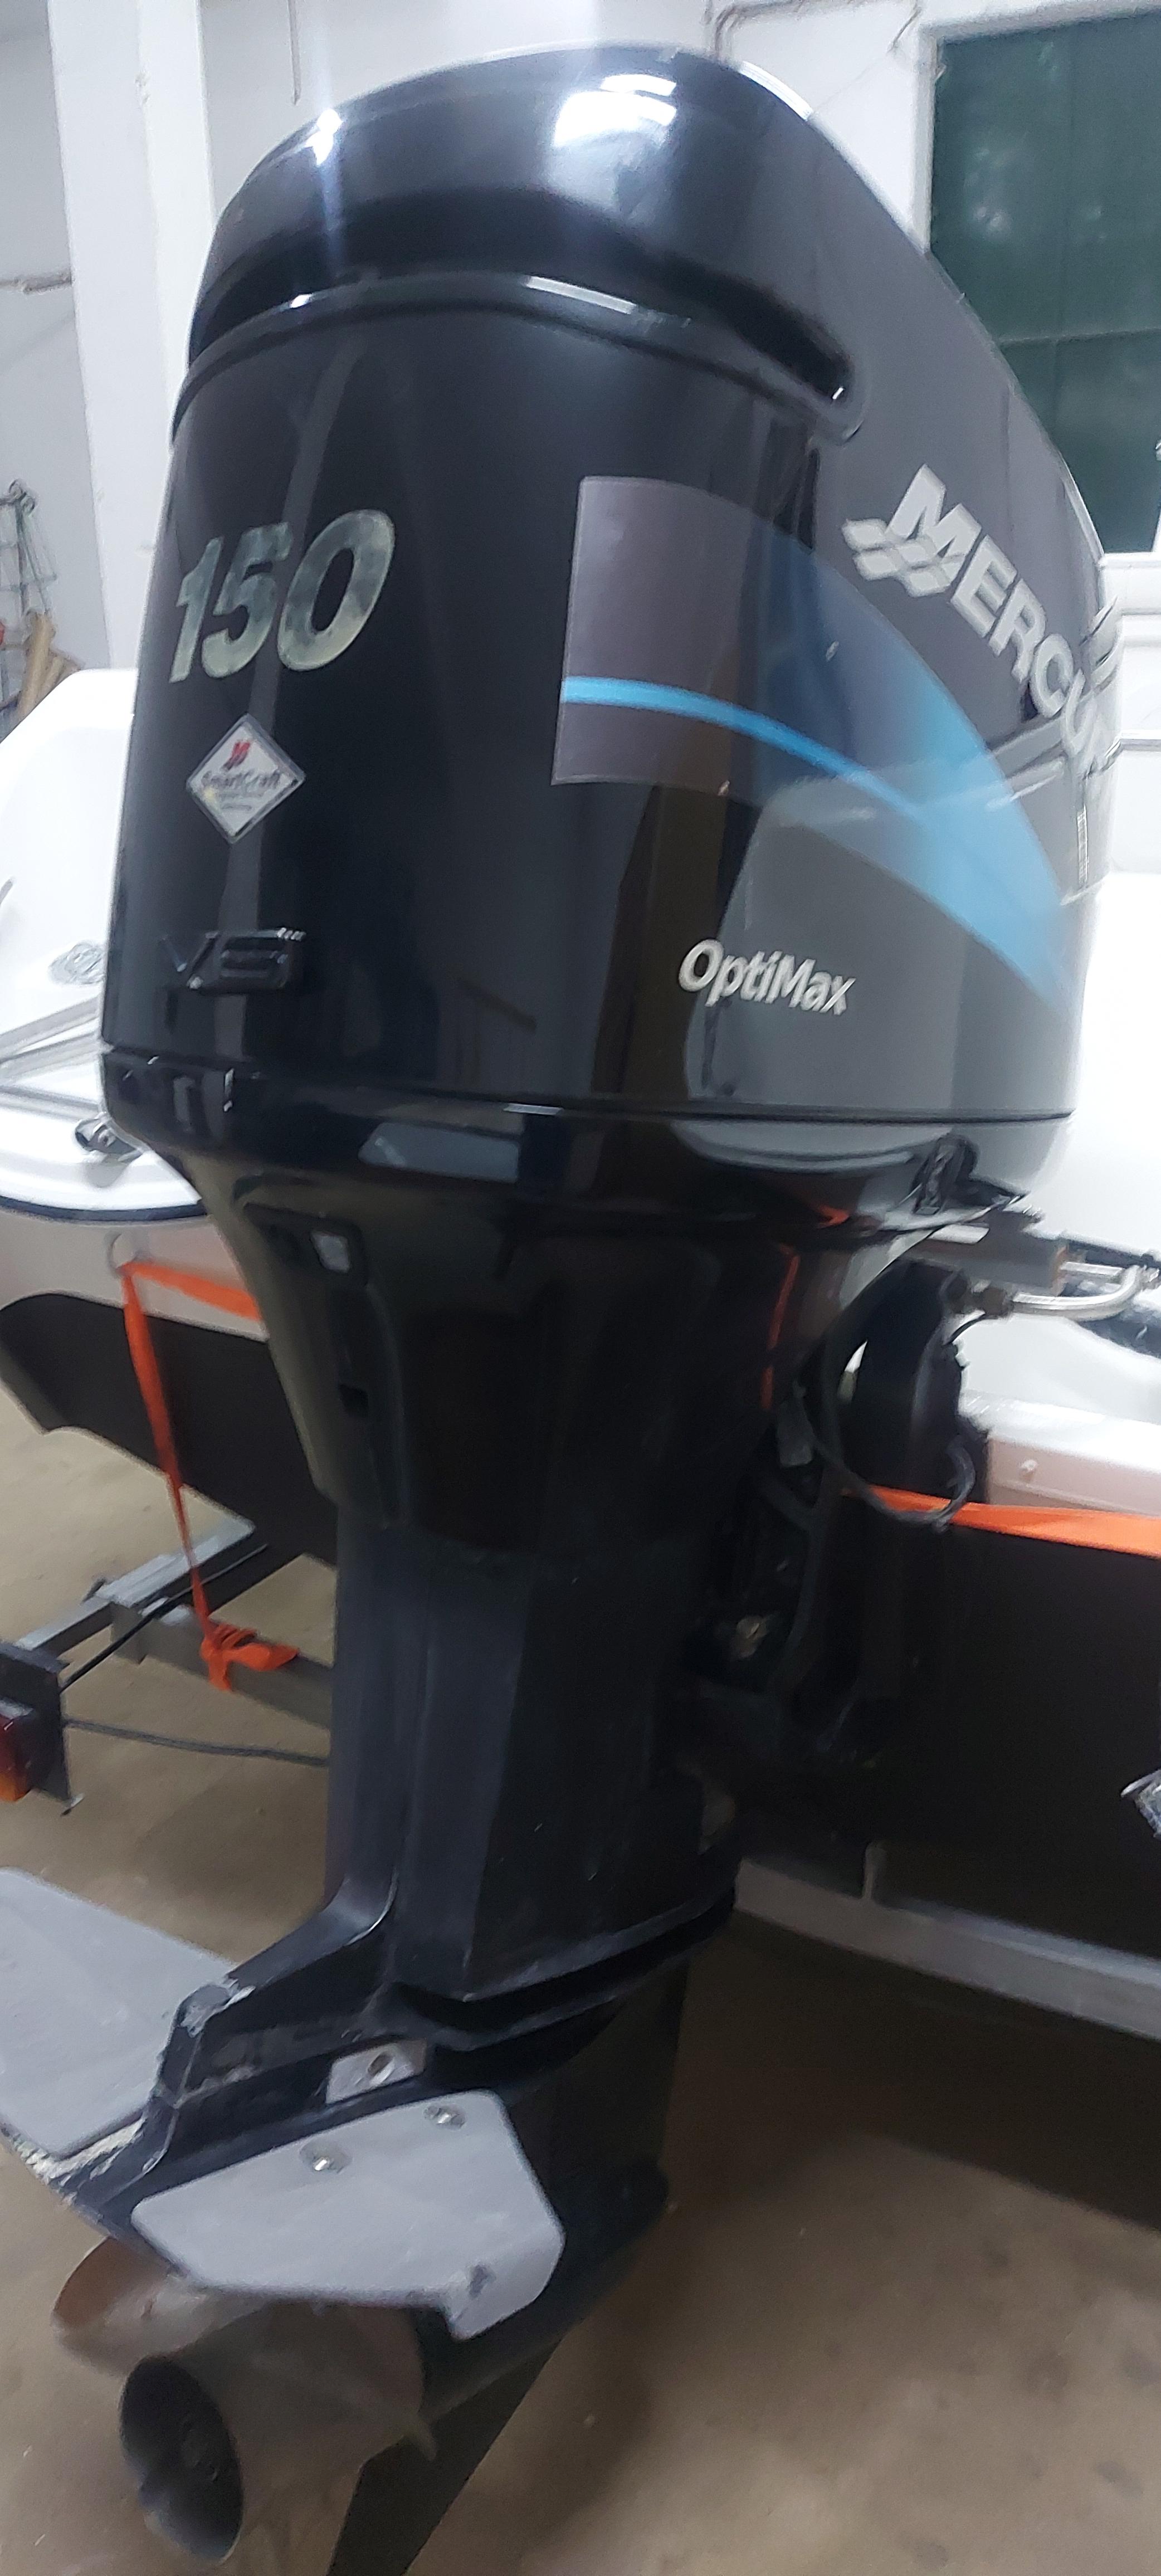 Mercury 2-stroke outboard engines for sale - TopBoats